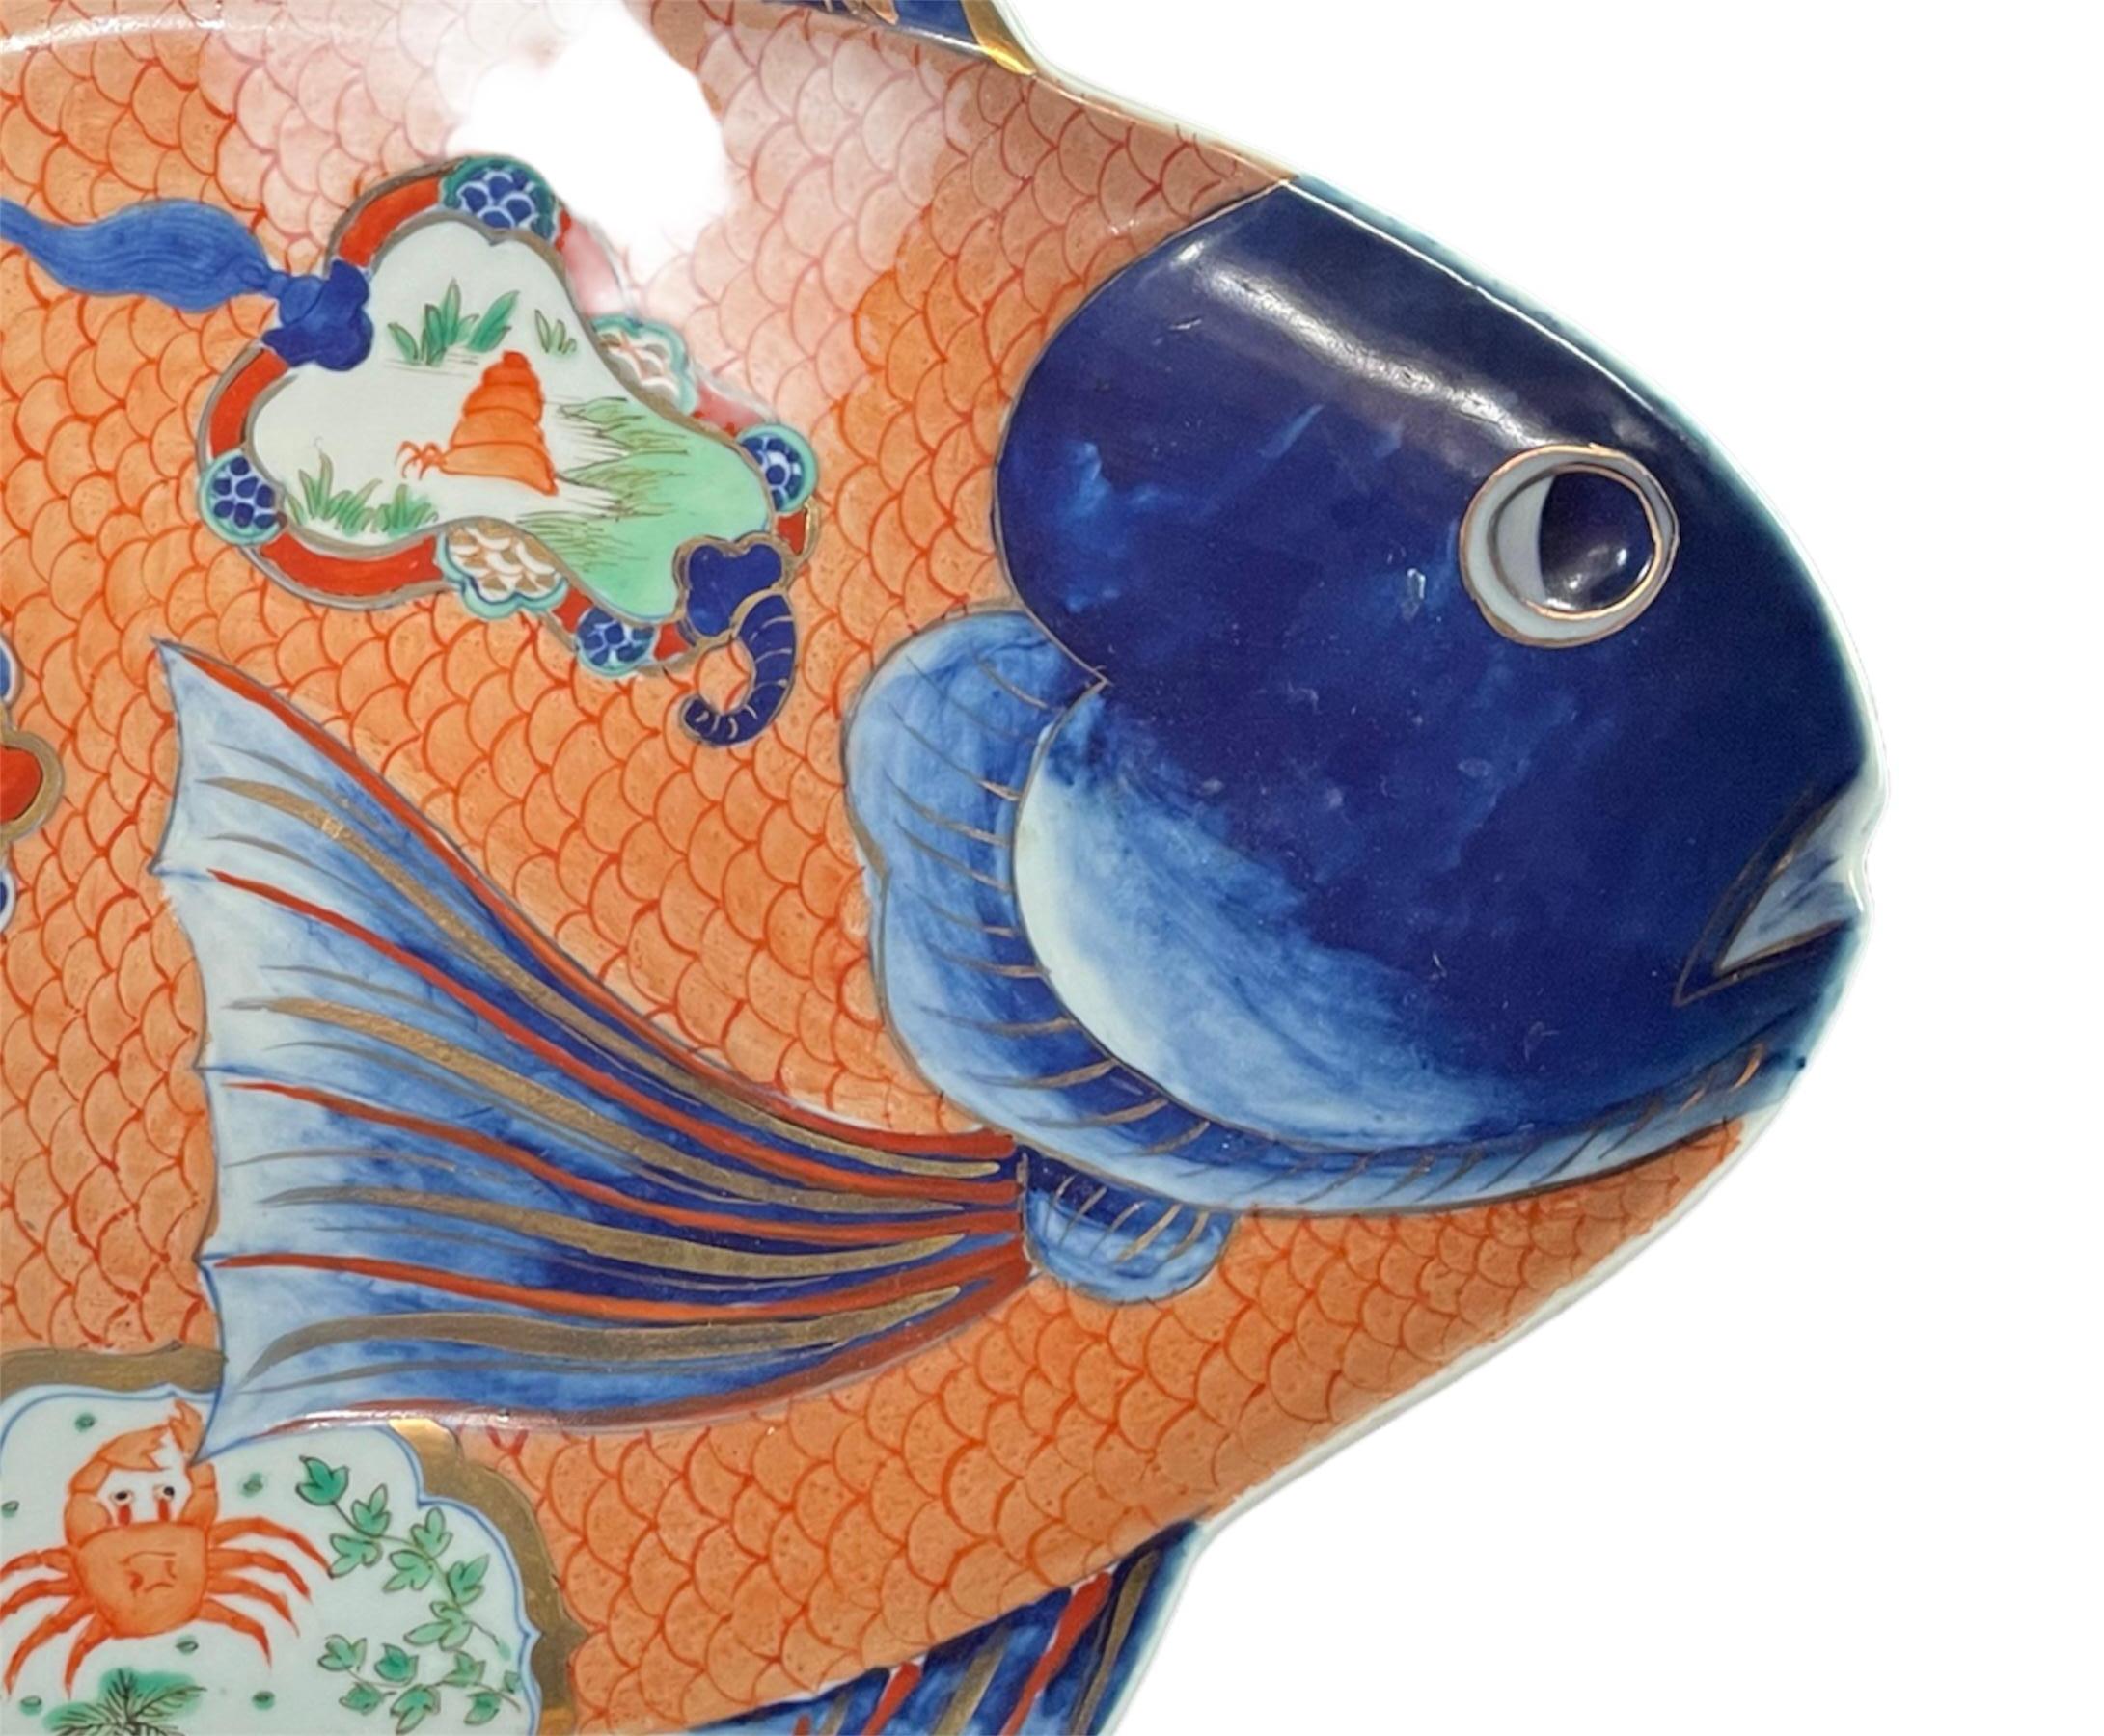 Truly a delicate beauty. A antique porcelain fish platter that can be used in everyday life or for home decor. The beauty of this piece is the hand painted details with a thin glaze, fish in a bowl, the crab is adorable and the gold detail is soft